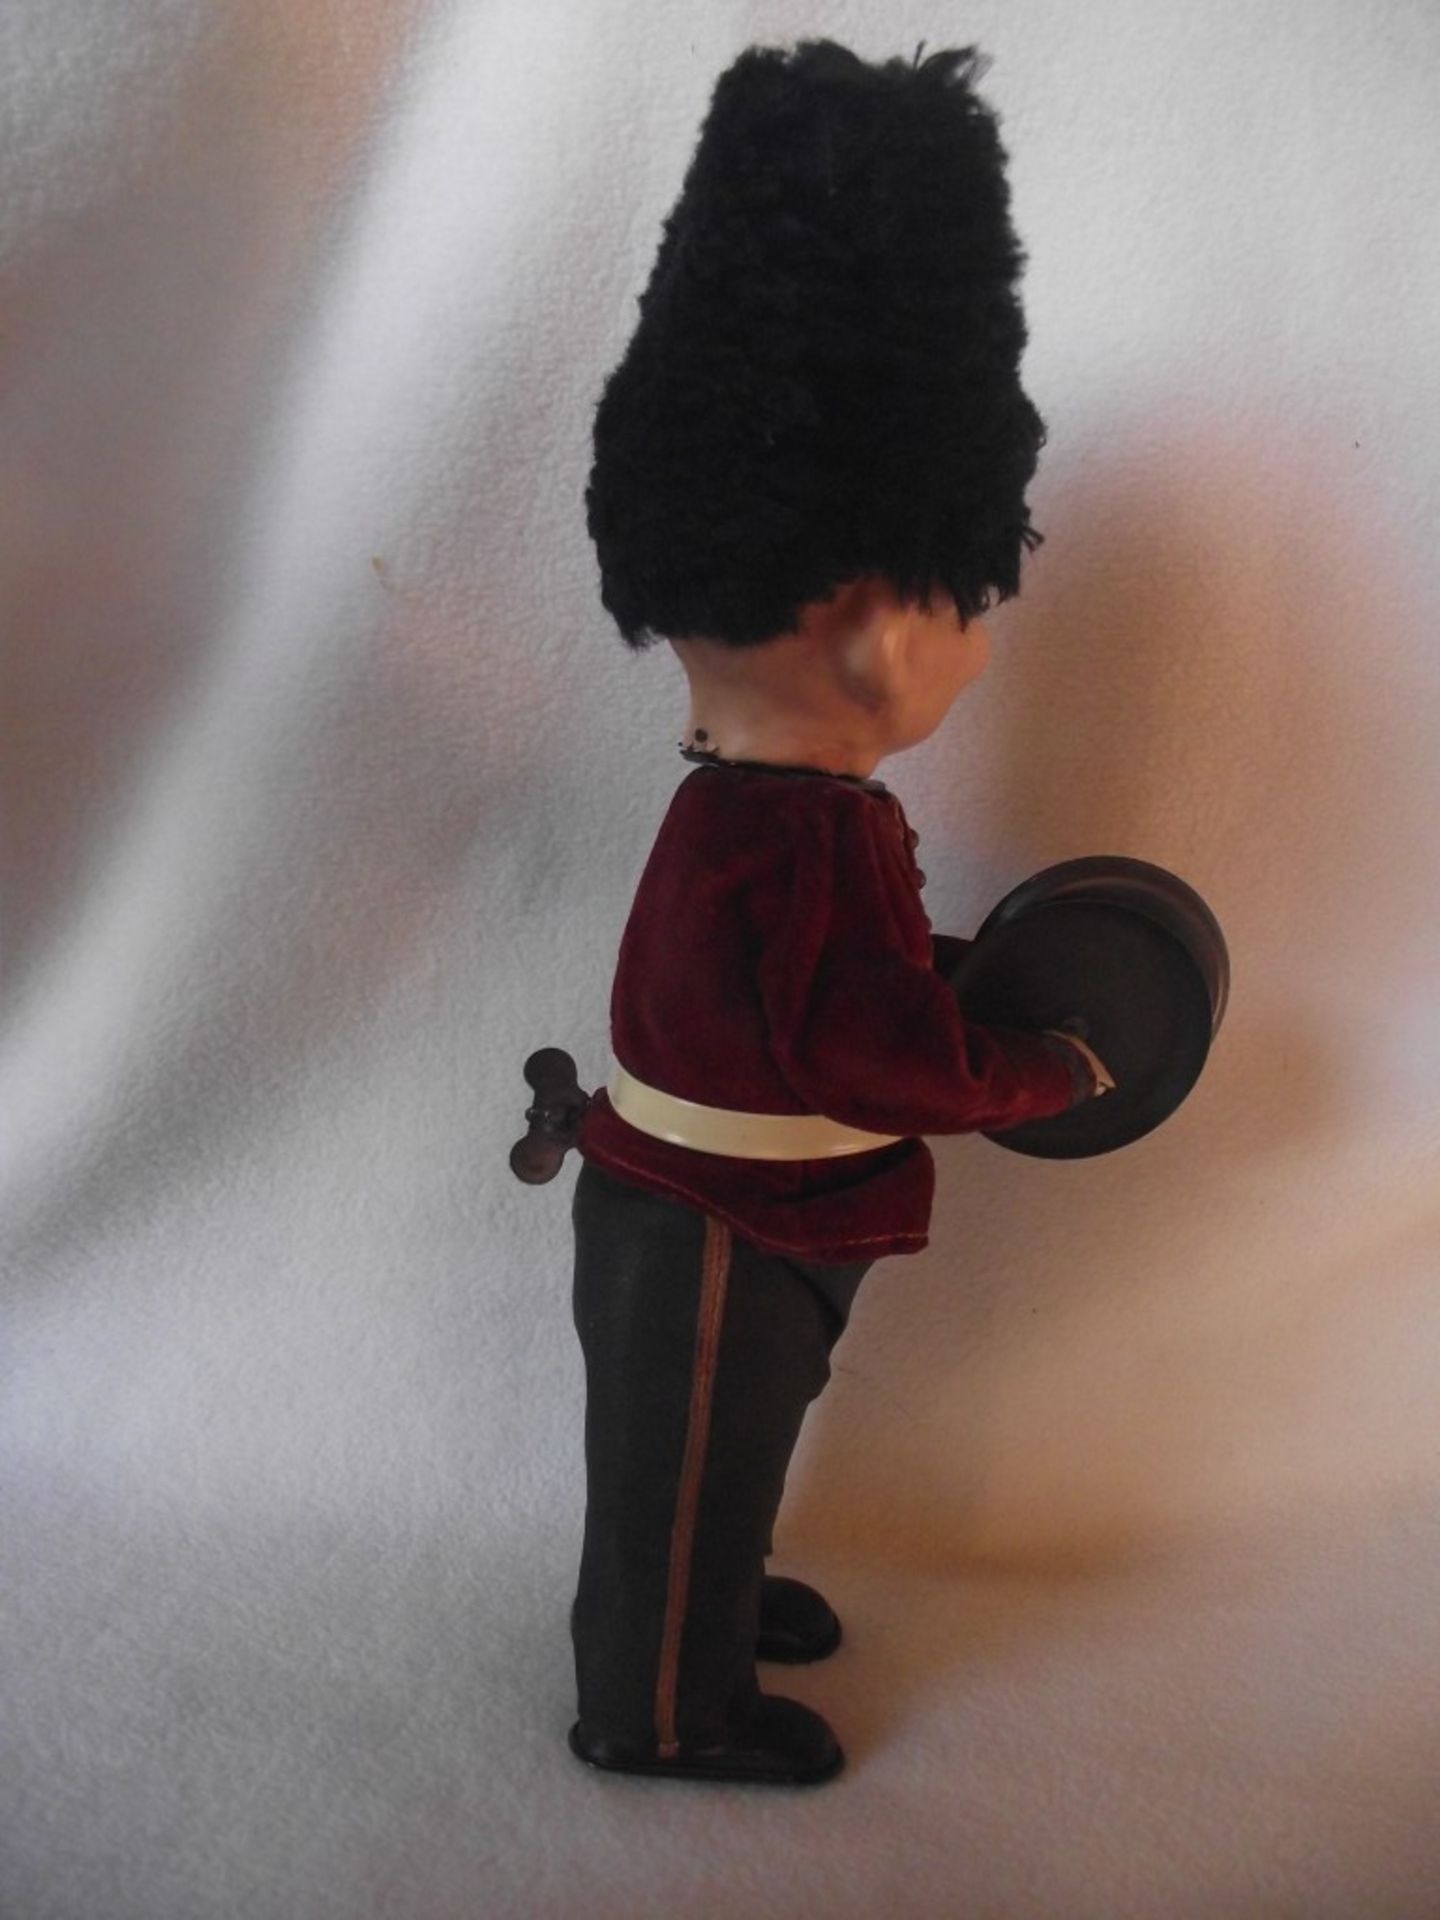 Vintage Clockwork Guardsman Playing Cymbals - Moving Bisque Head -1950's-1960's - Image 10 of 23